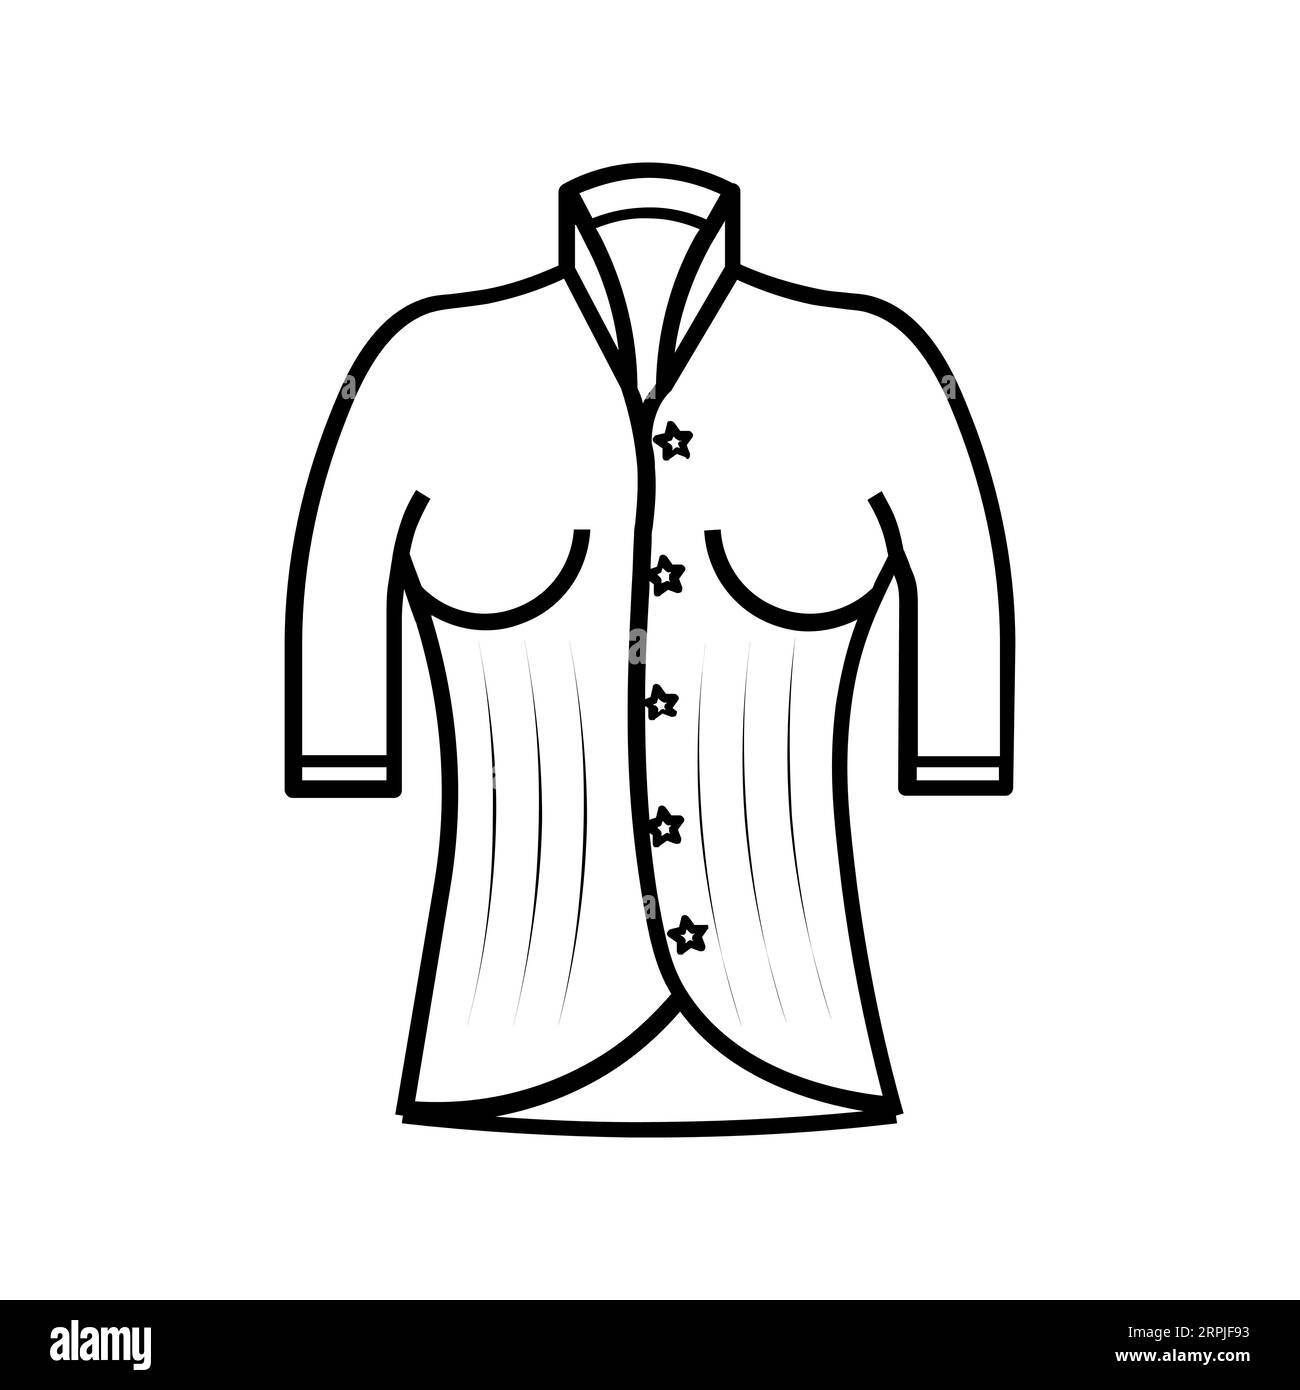 LADIES DRESS Editable and Resizeable Vector Icon Stock Vector